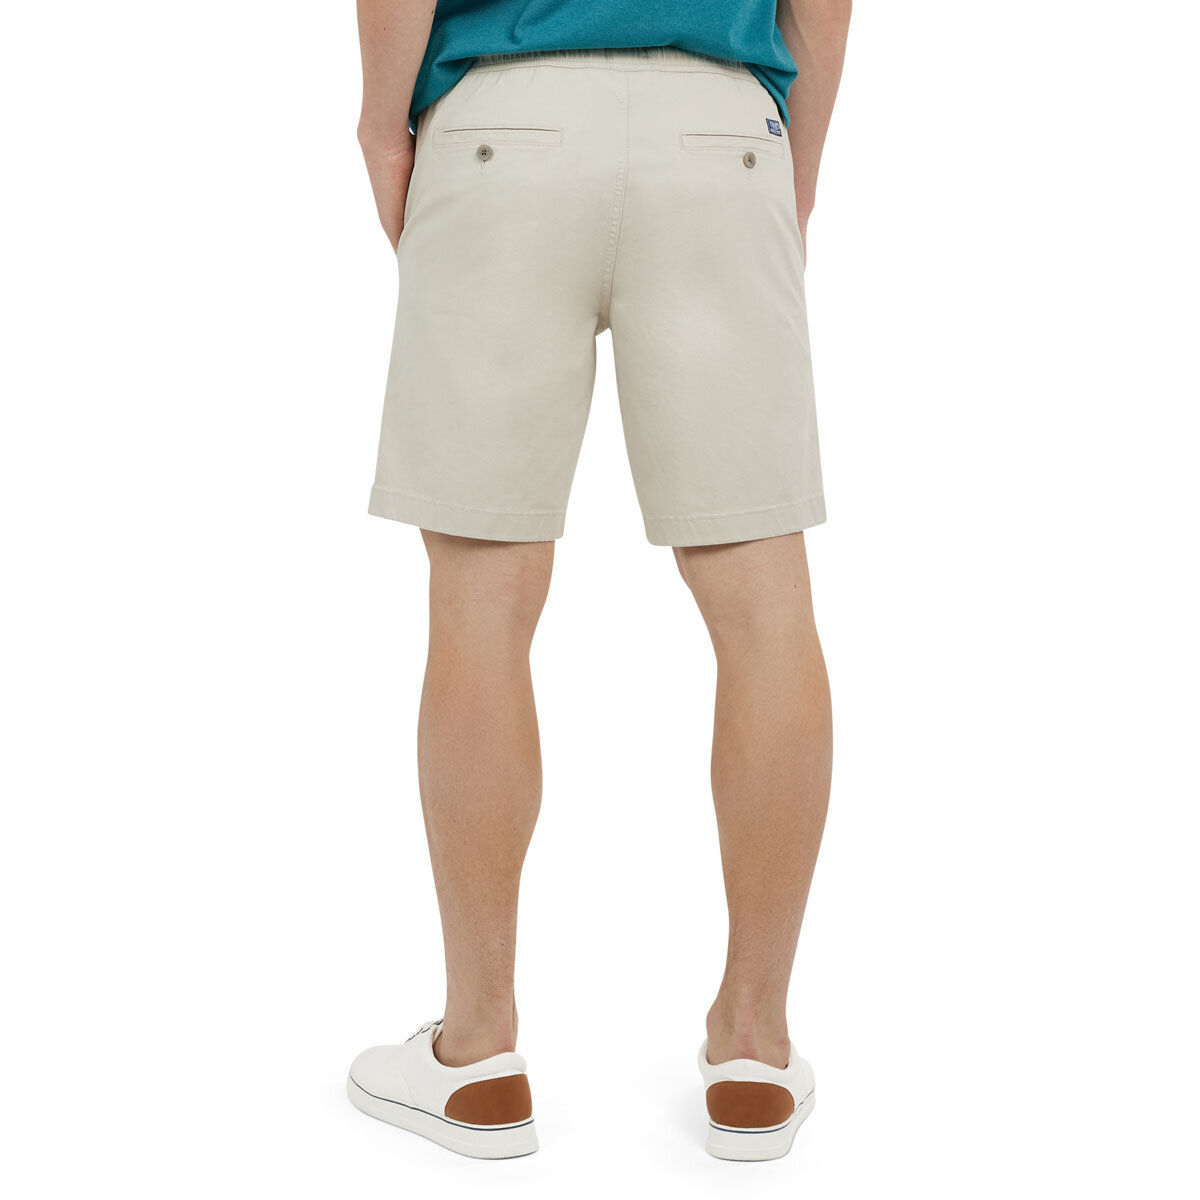 Chaps Men’s Reese Flex Pull-On Short in Stone